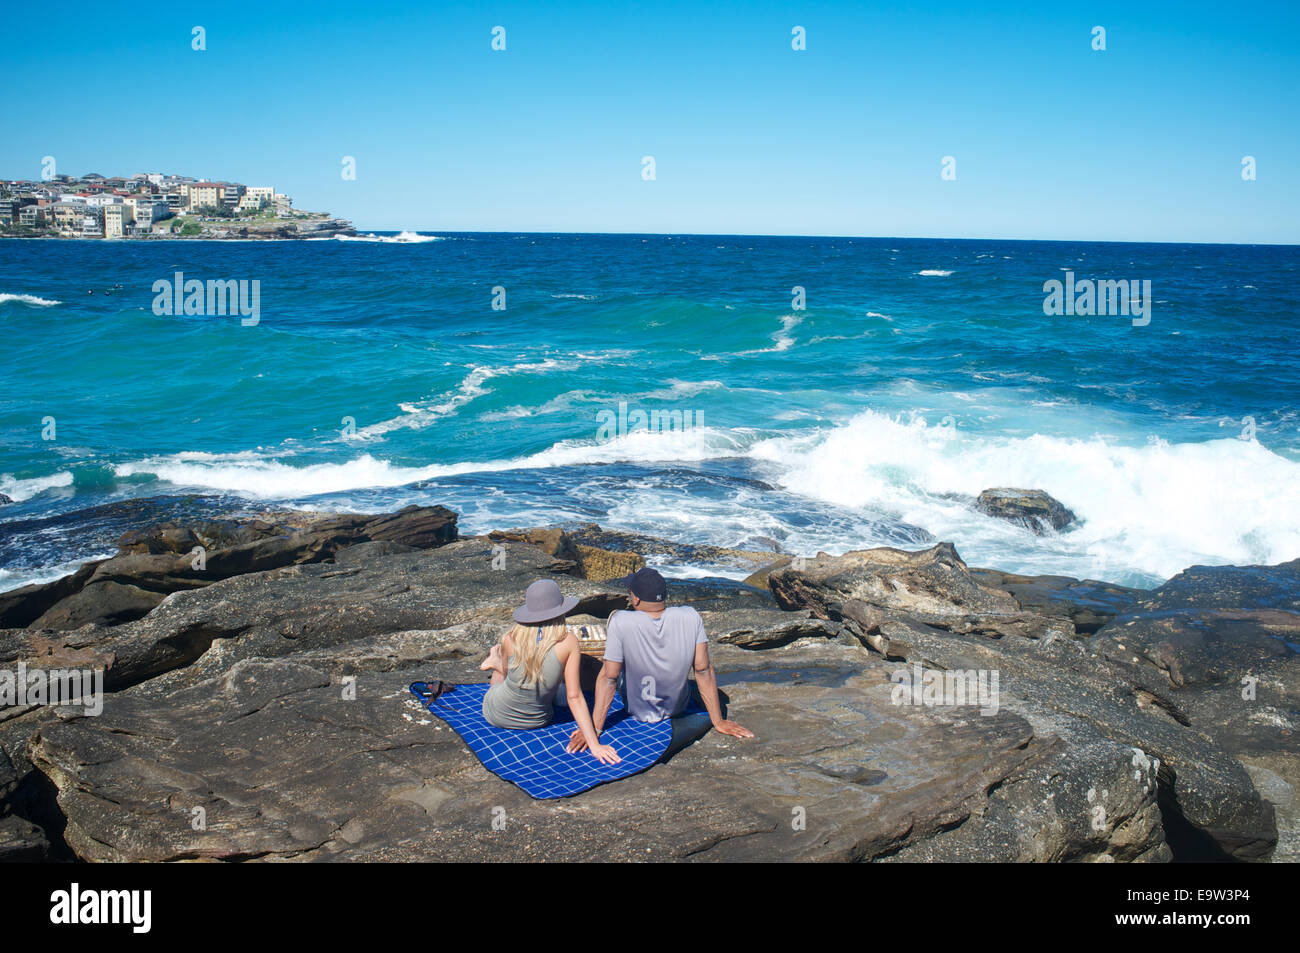 A picnicking couple looking out on the Pacific Ocean at Bondi, New South Wales, Australia Stock Photo